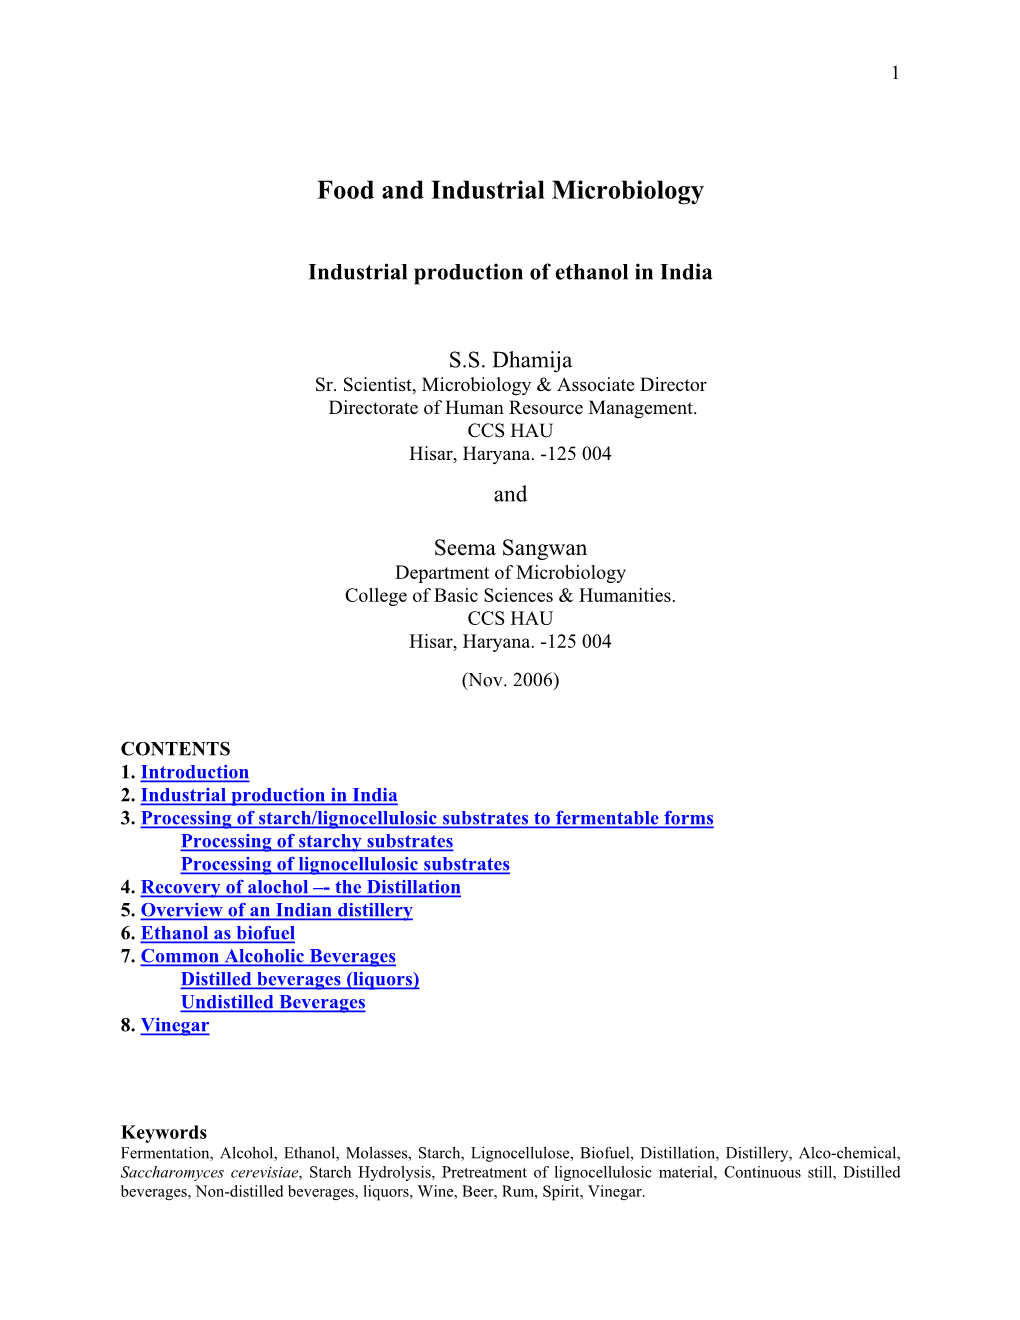 Food and Industrial Microbiology